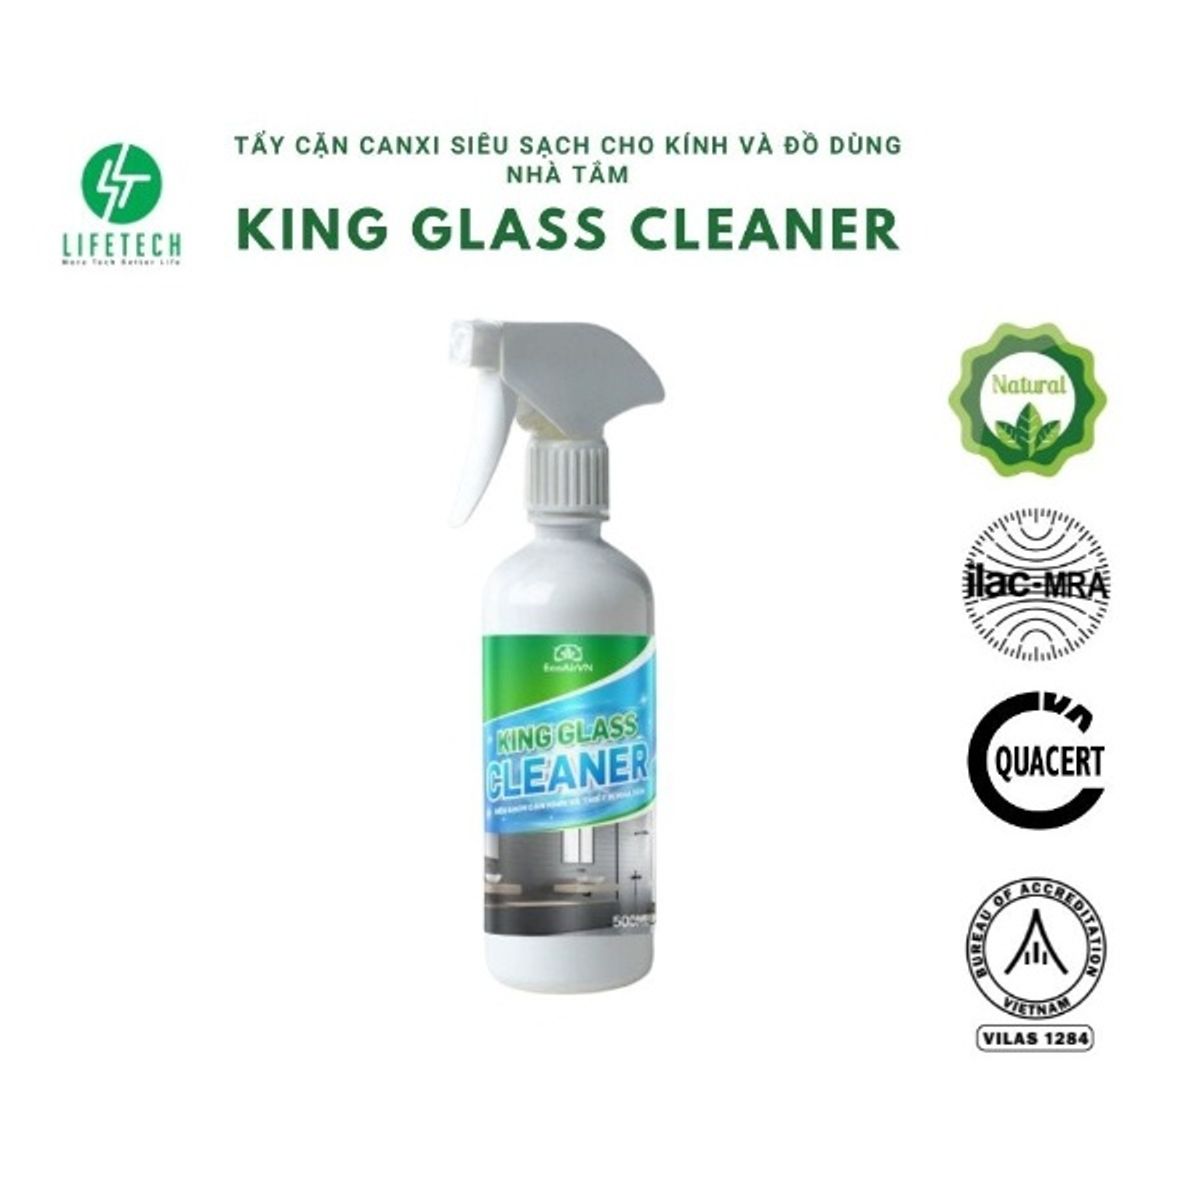 mochanstore.com TAY TRANG CAN CANXIN KINH KINGGLASS CLEANER 500ML ECOAIRVN